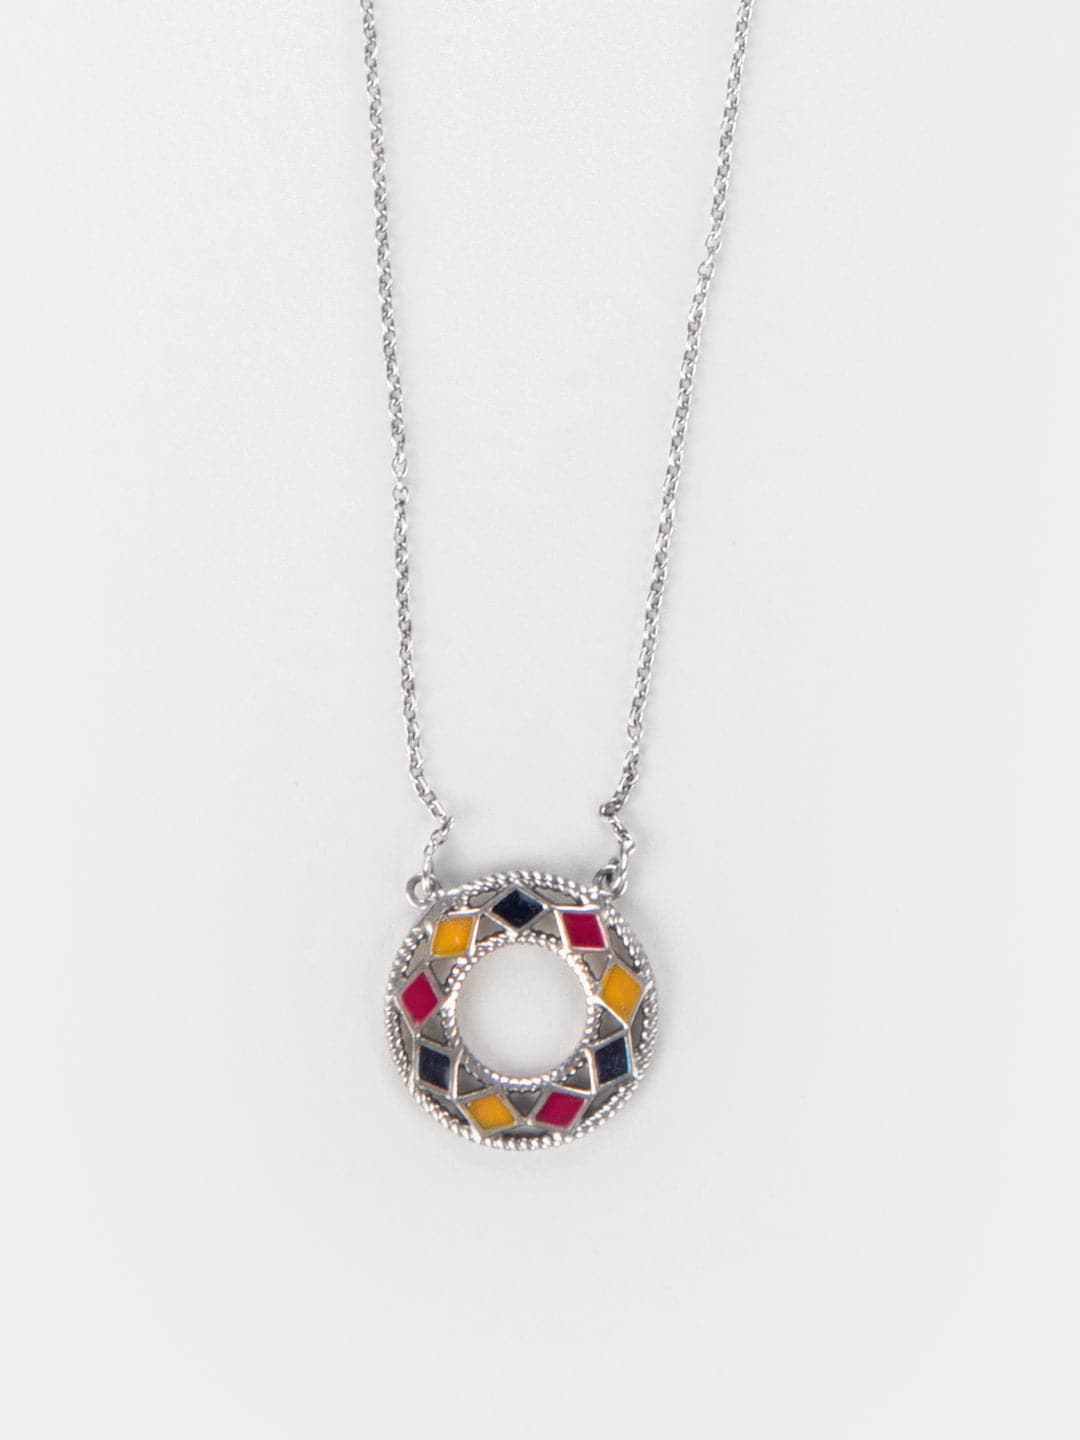 Chokti Pattern Necklace in 925 Silver